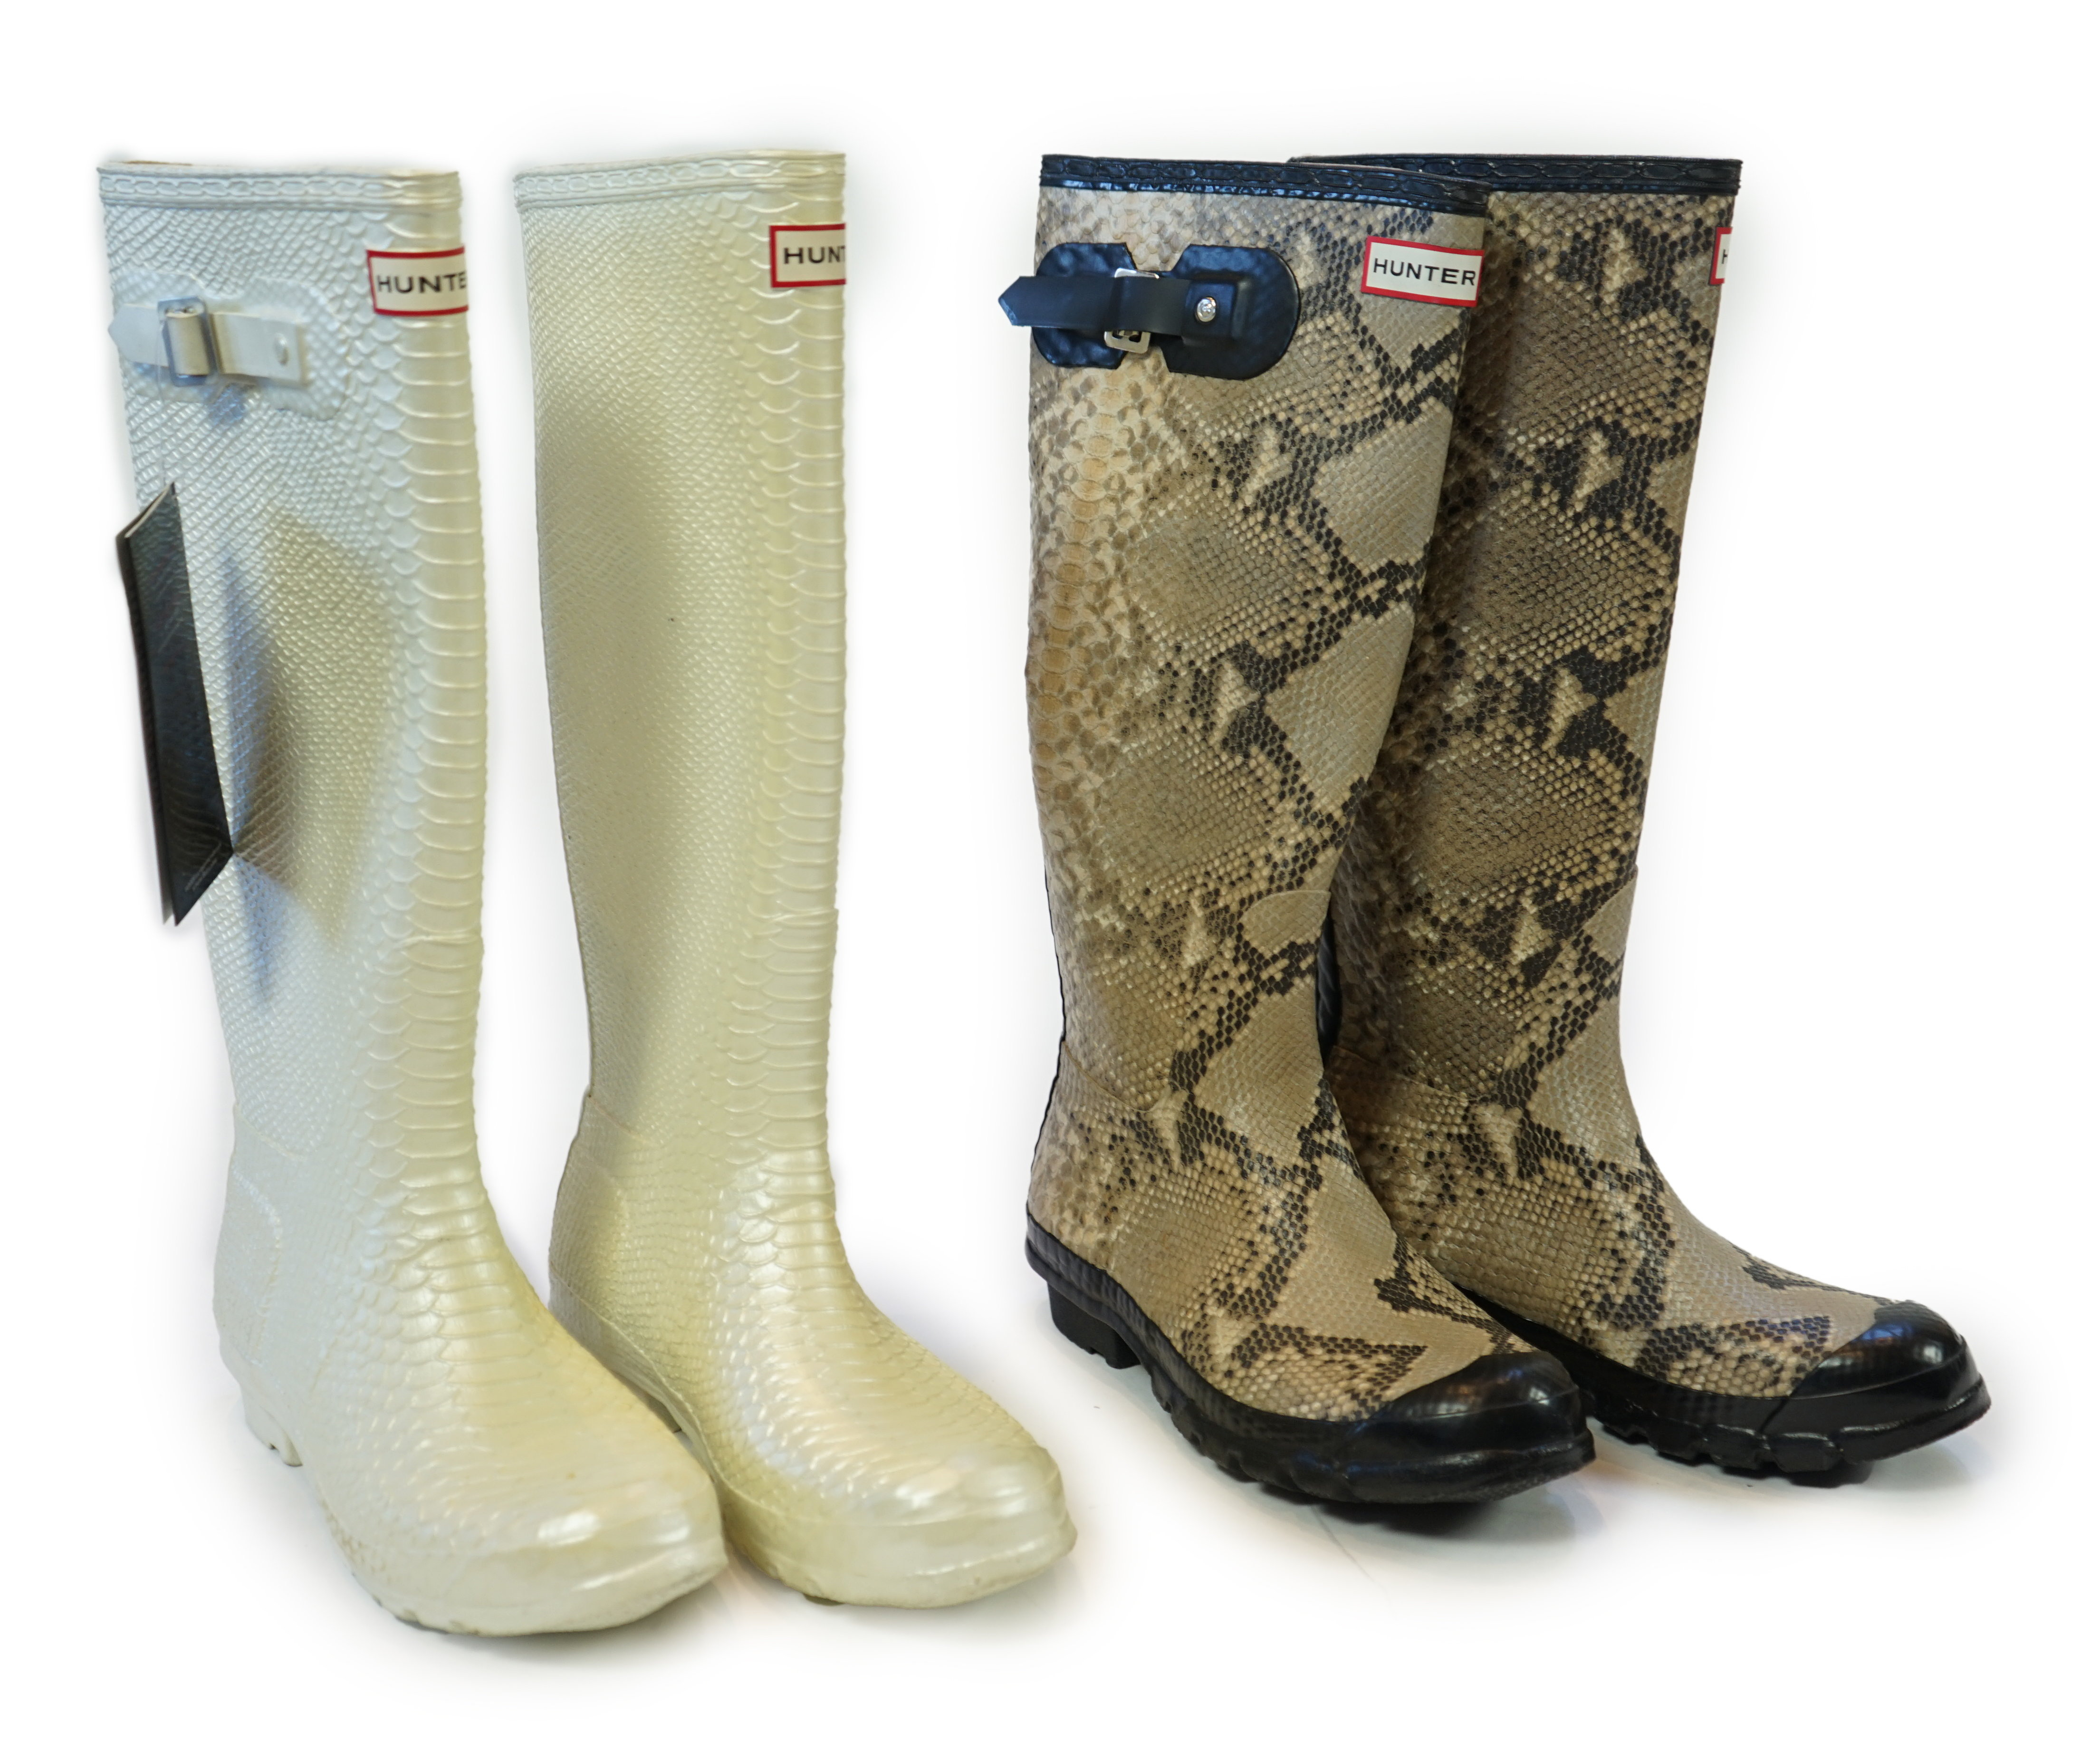 Two pairs of lady's Hunter snake-skin effect wellington boots, size UK 7